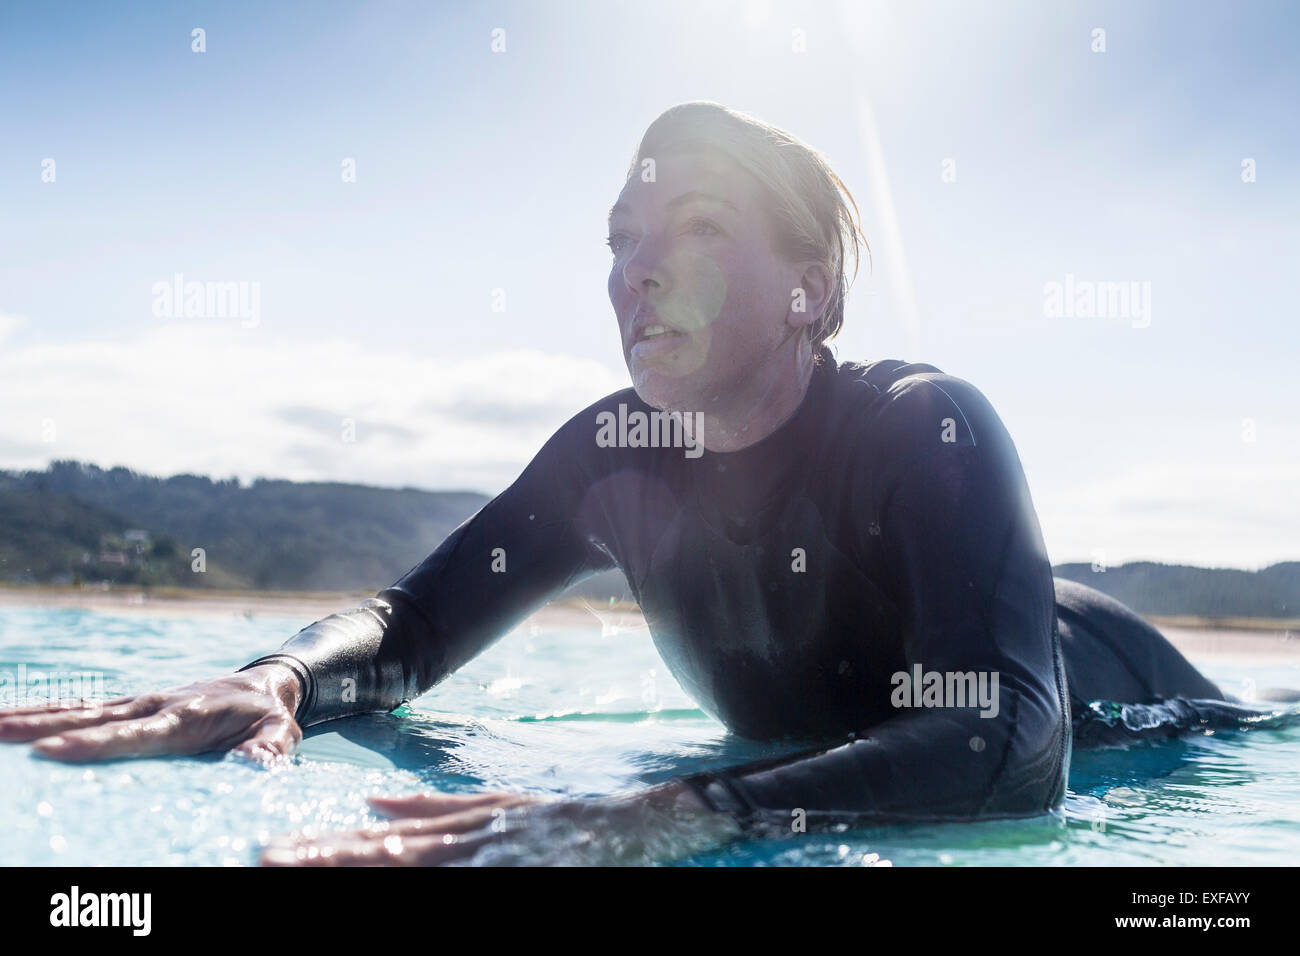 Surfer in the water, Bay of Islands, NZ Stock Photo